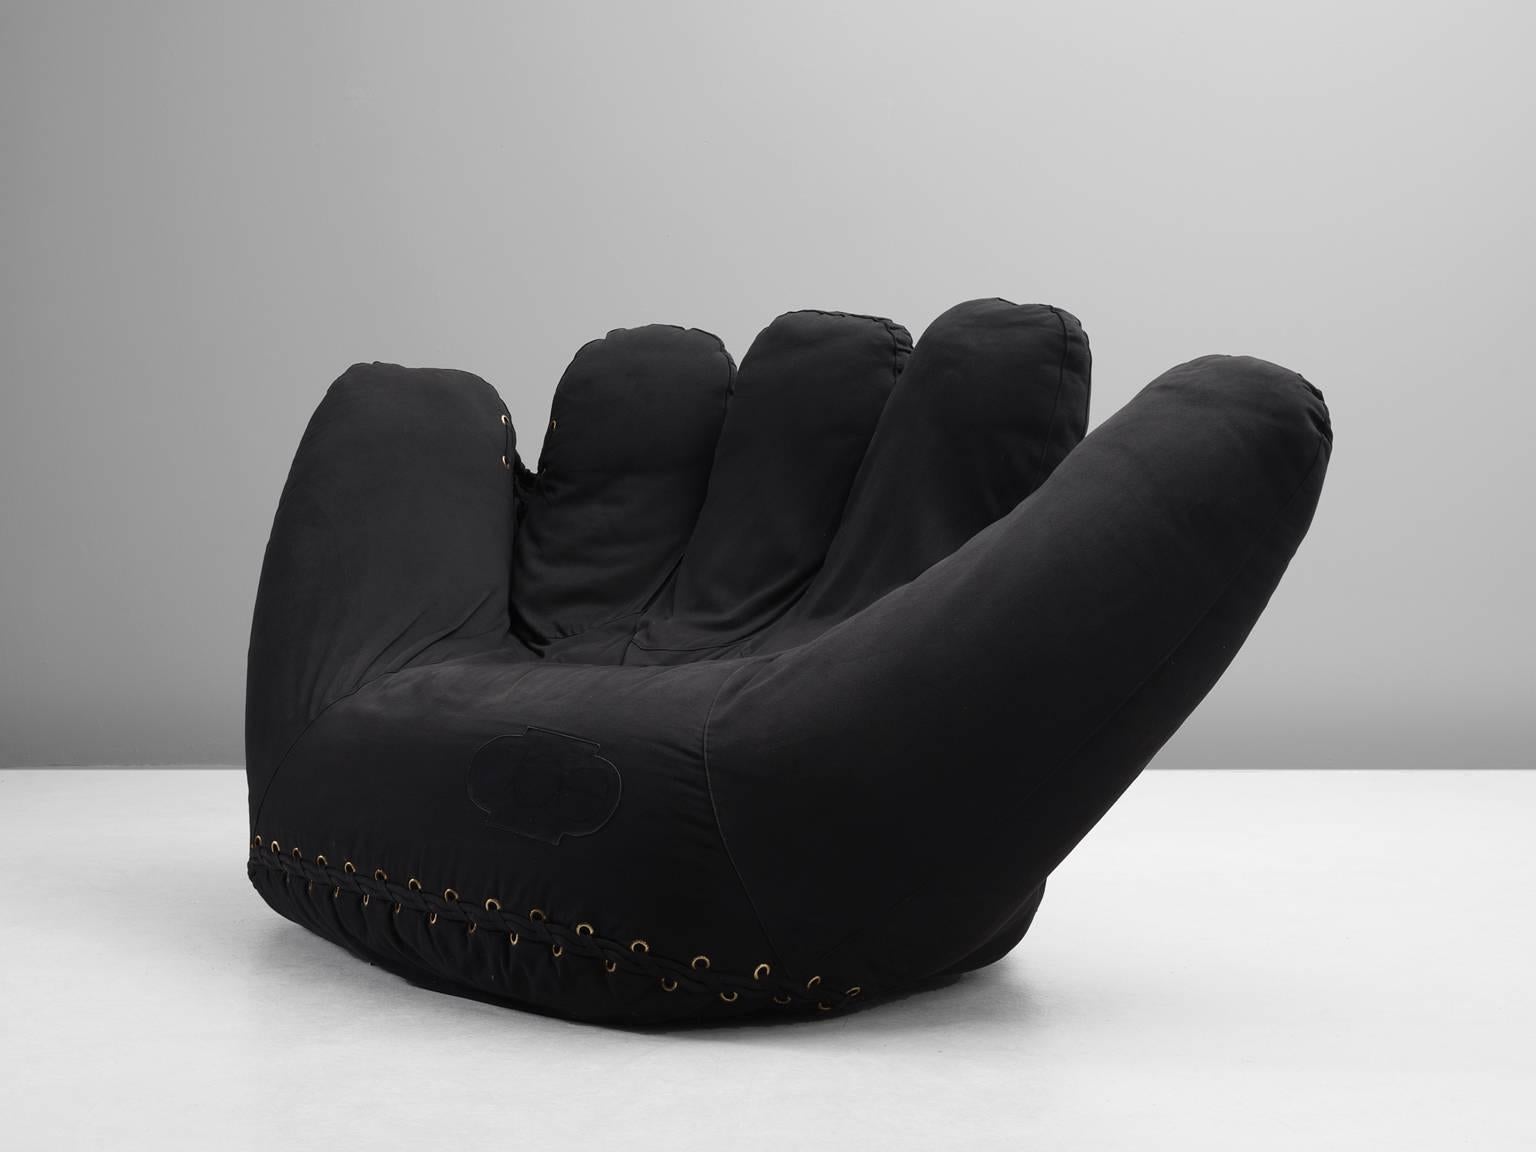 Glove chair, fabric rope, 1970s, Italy.

'A chair that fits like a glove'.

This extraordinary chair is named the 'Joe Seat' and was dedicated to the legendary baseball champion, Joe DiMaggio, the giant Joe Seat was designed in 1970 by Italian